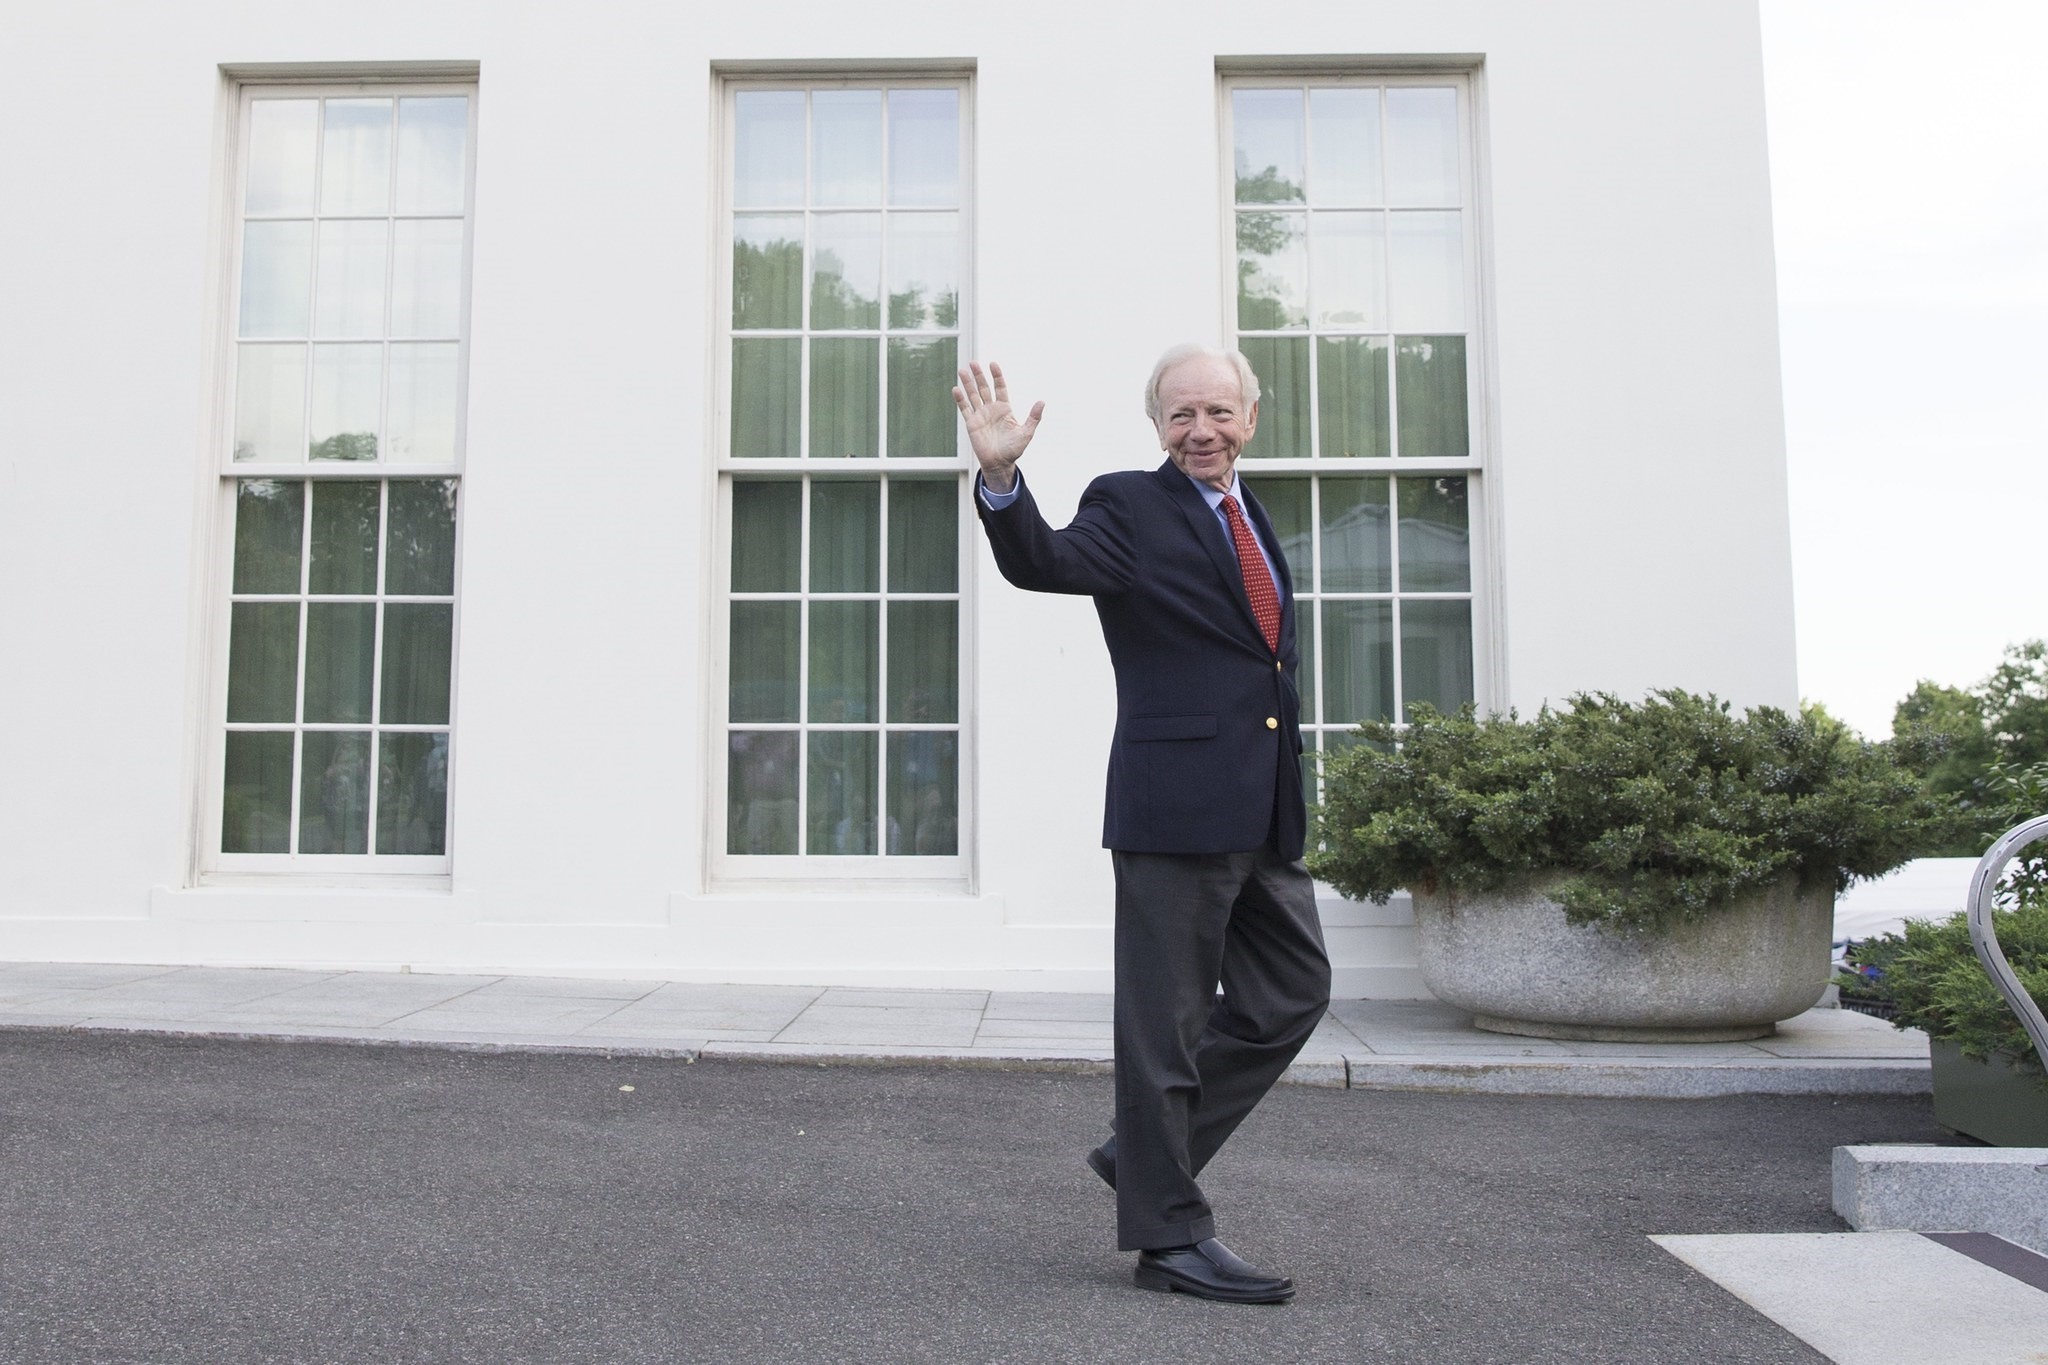 Former Senator from Connecticut Joe Lieberman waves after walking out of the West Wing of the White House following a meeting with US President Donald J. Trump. (EPA Photo) 